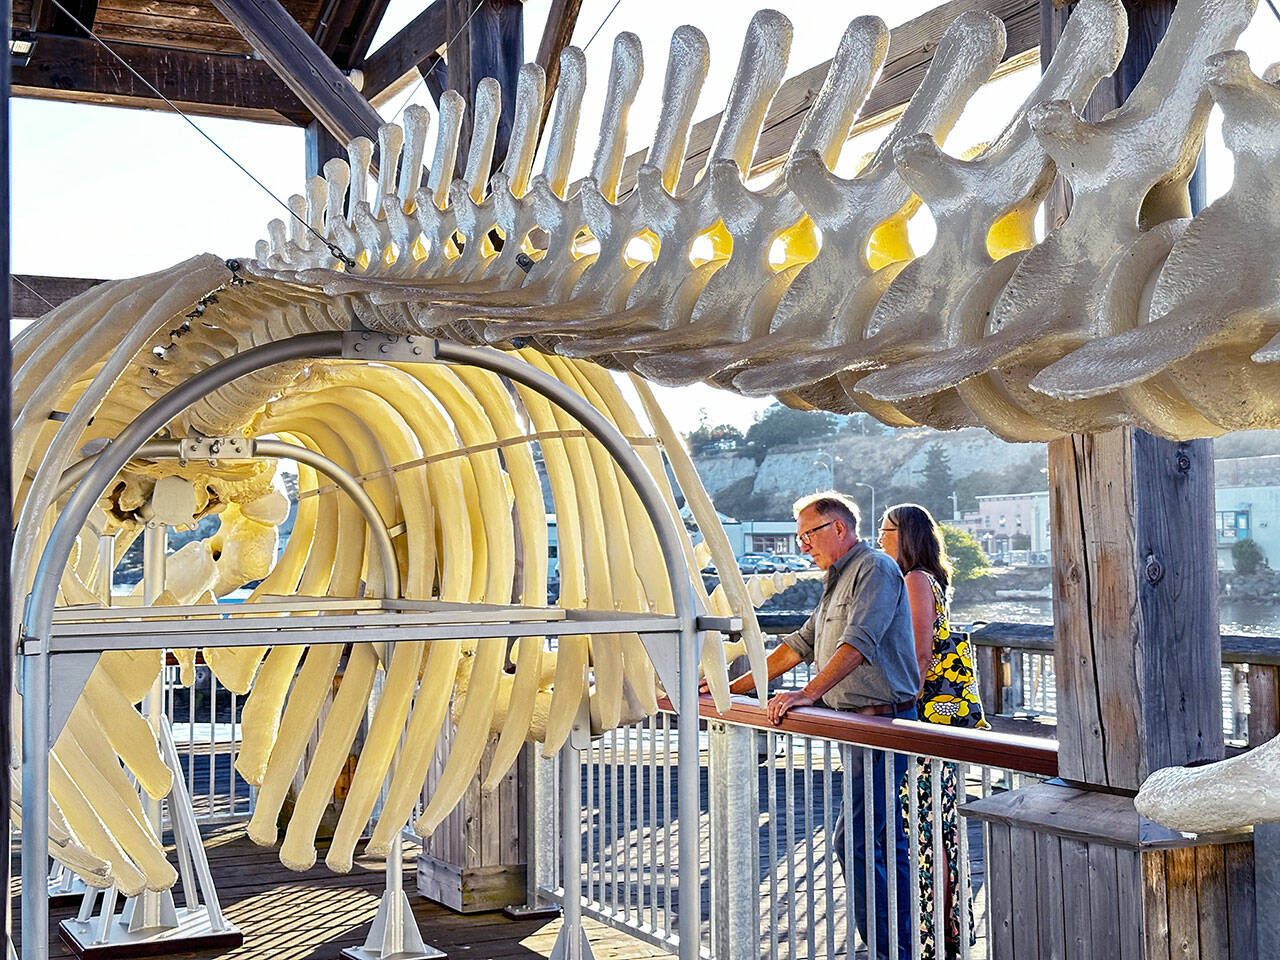 Visitors to Union Wharf in downtown Port Townsend read information about a North Pacific gray whale that was stranded on a beach in Port Ludlow and died in 2019 as they look at a display of the 42-foot whales skeleton on Union Wharf in Port Townsend. (Steve Mullensky/for Peninsula Daily News)